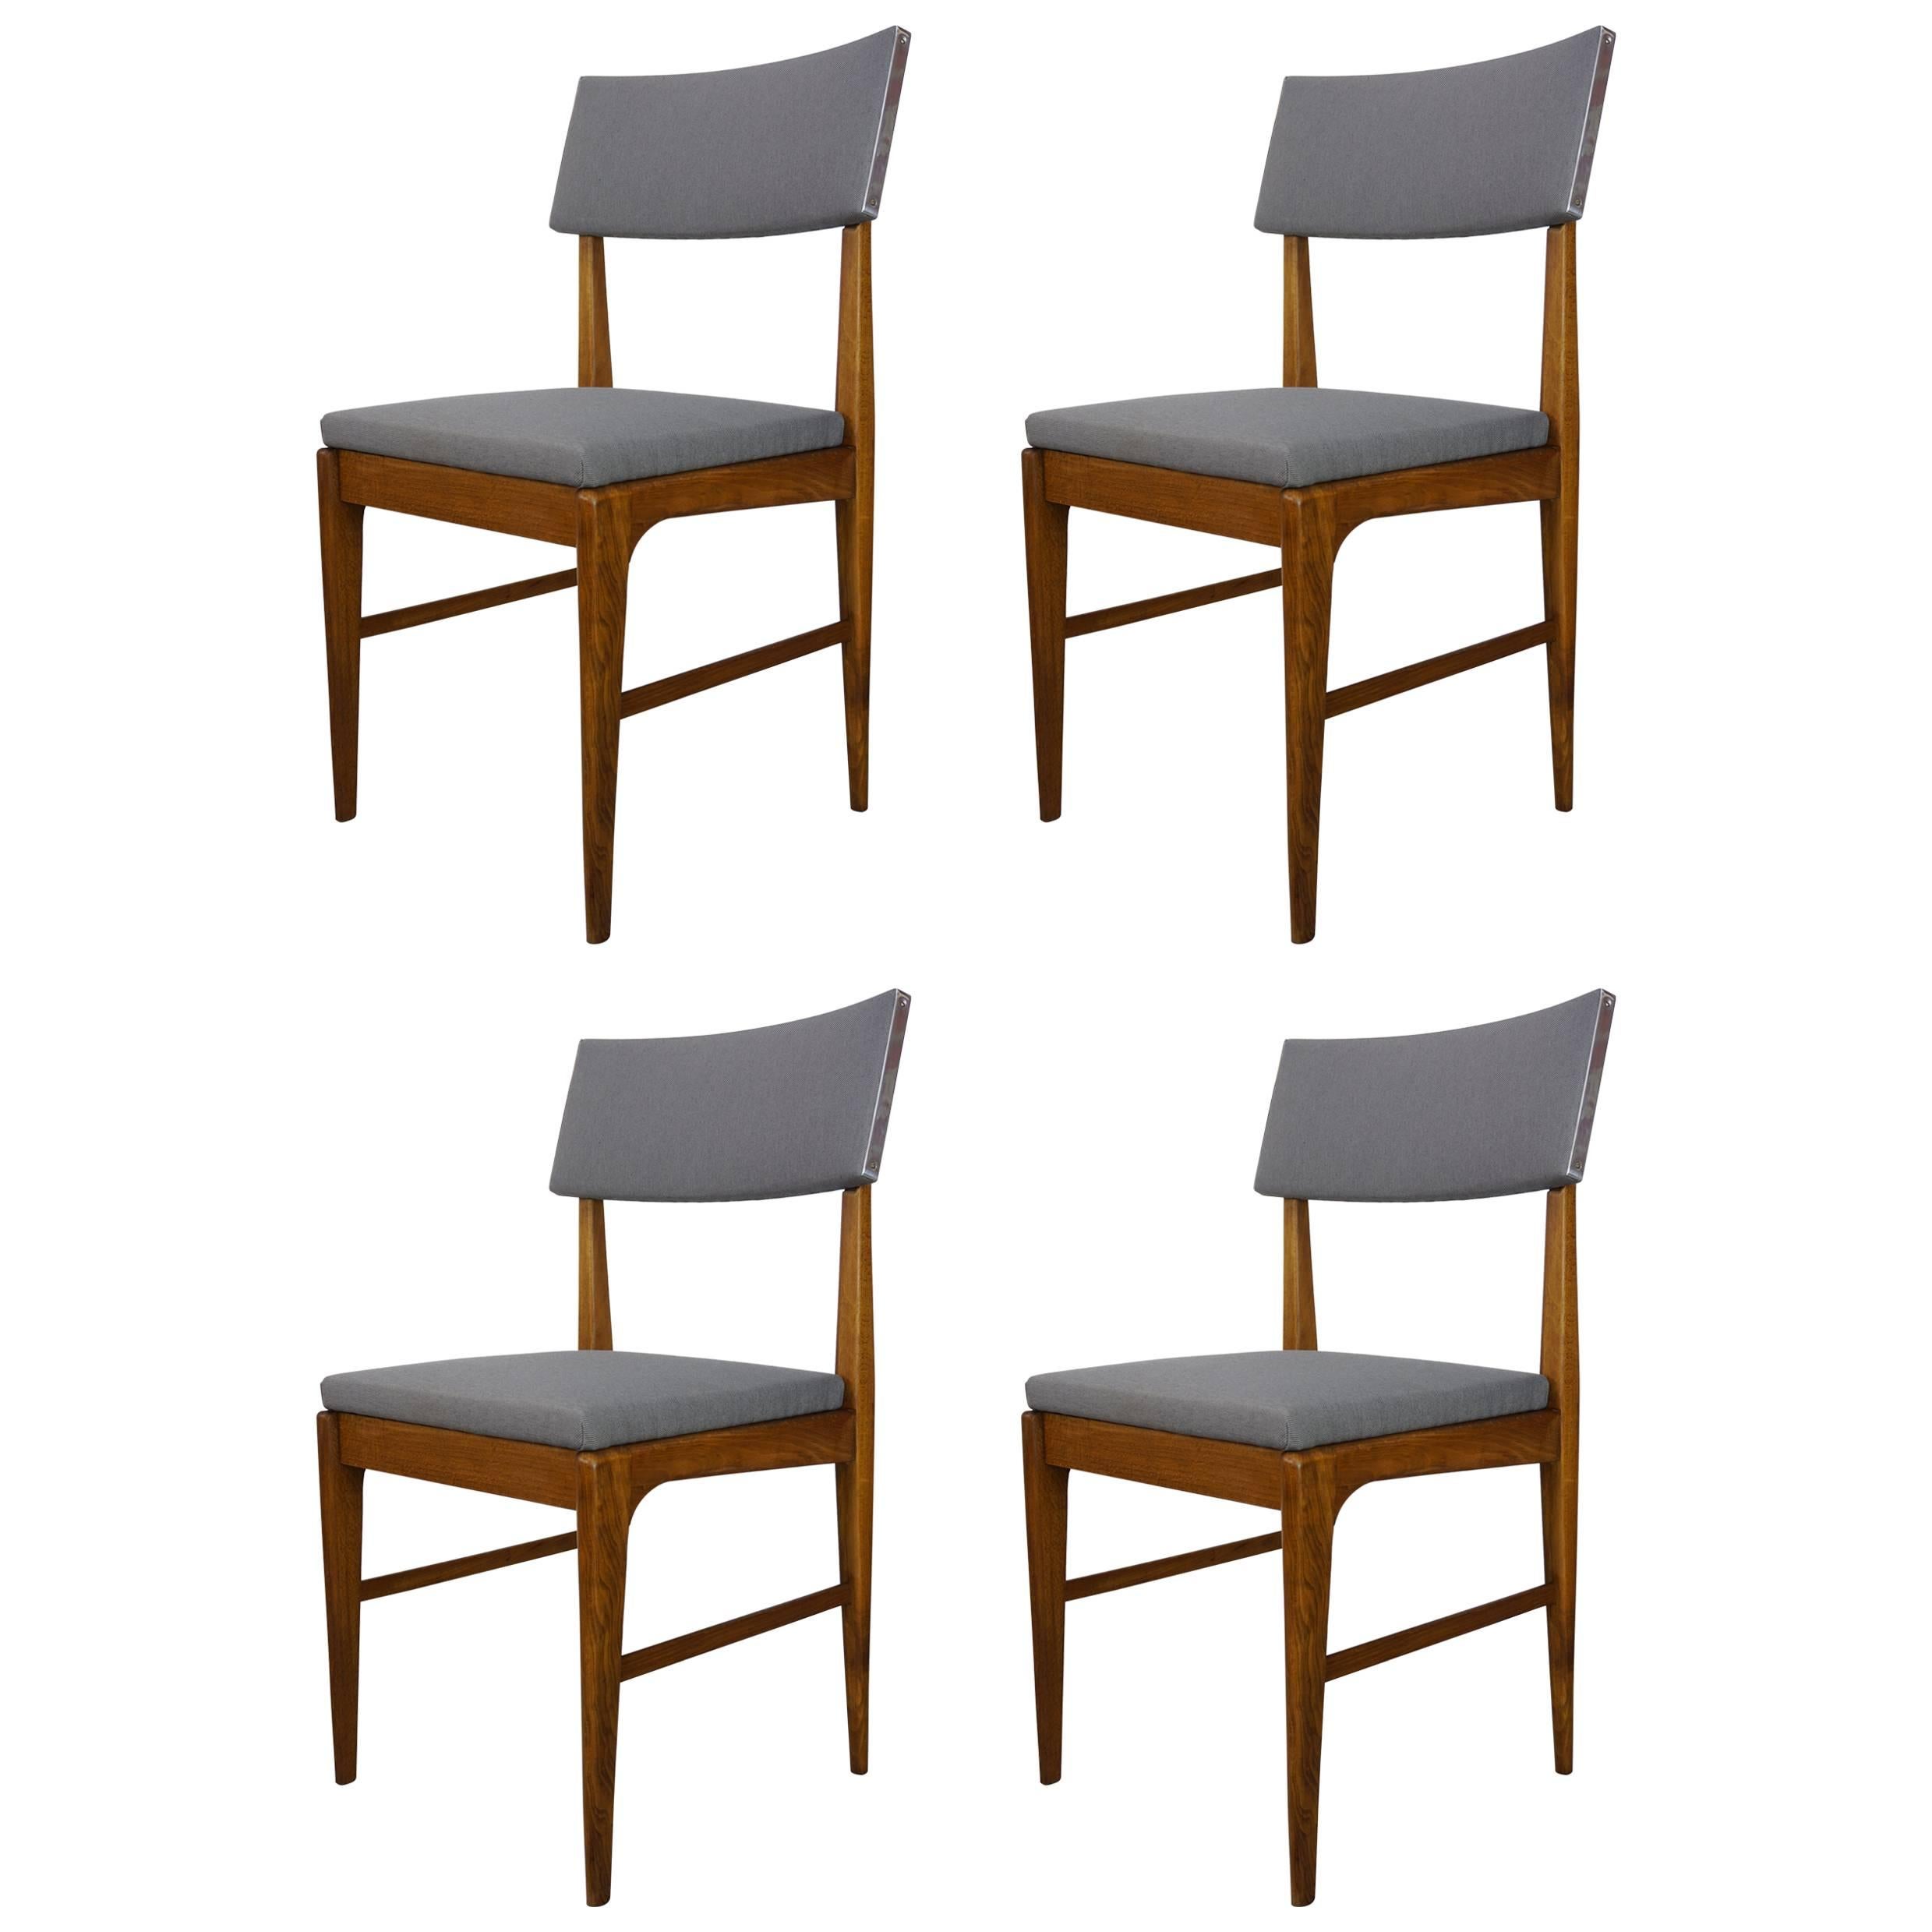 Set of Four Wooden Teak and Fabric Scandinavian Style Dutch Design Chairs